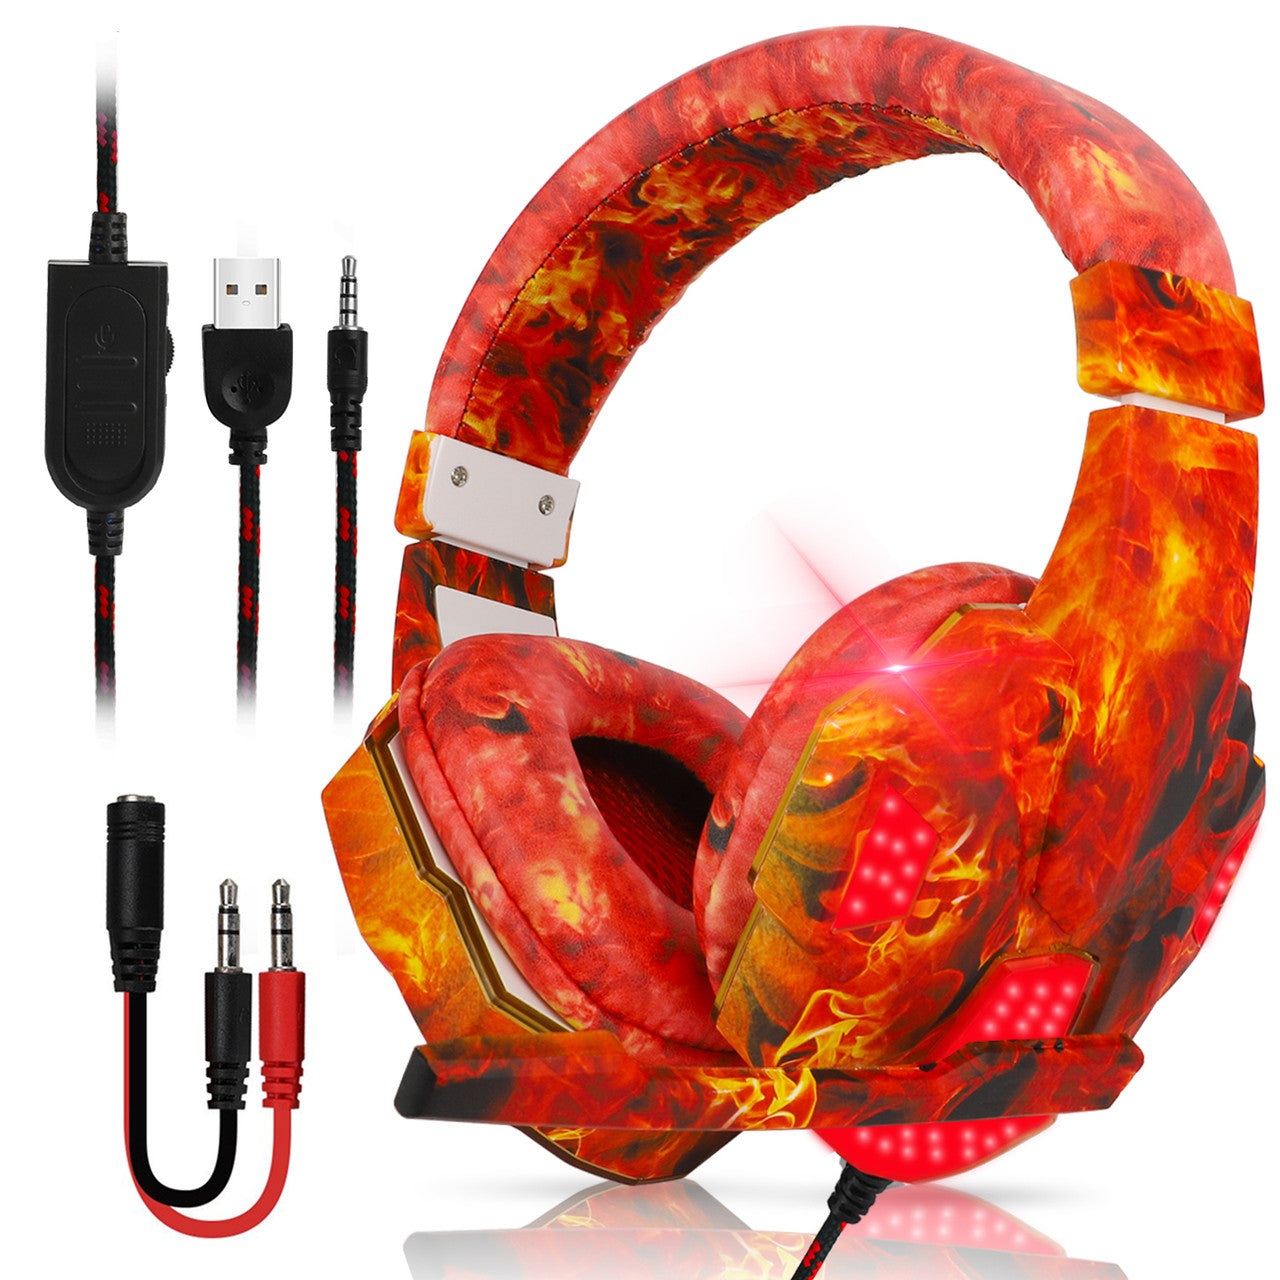 Wired Gaming Headset 3.5MM Headphone Jack - For Game, PC, Controller with Mic, Surround Sound, Soft Earmuffs (Red)